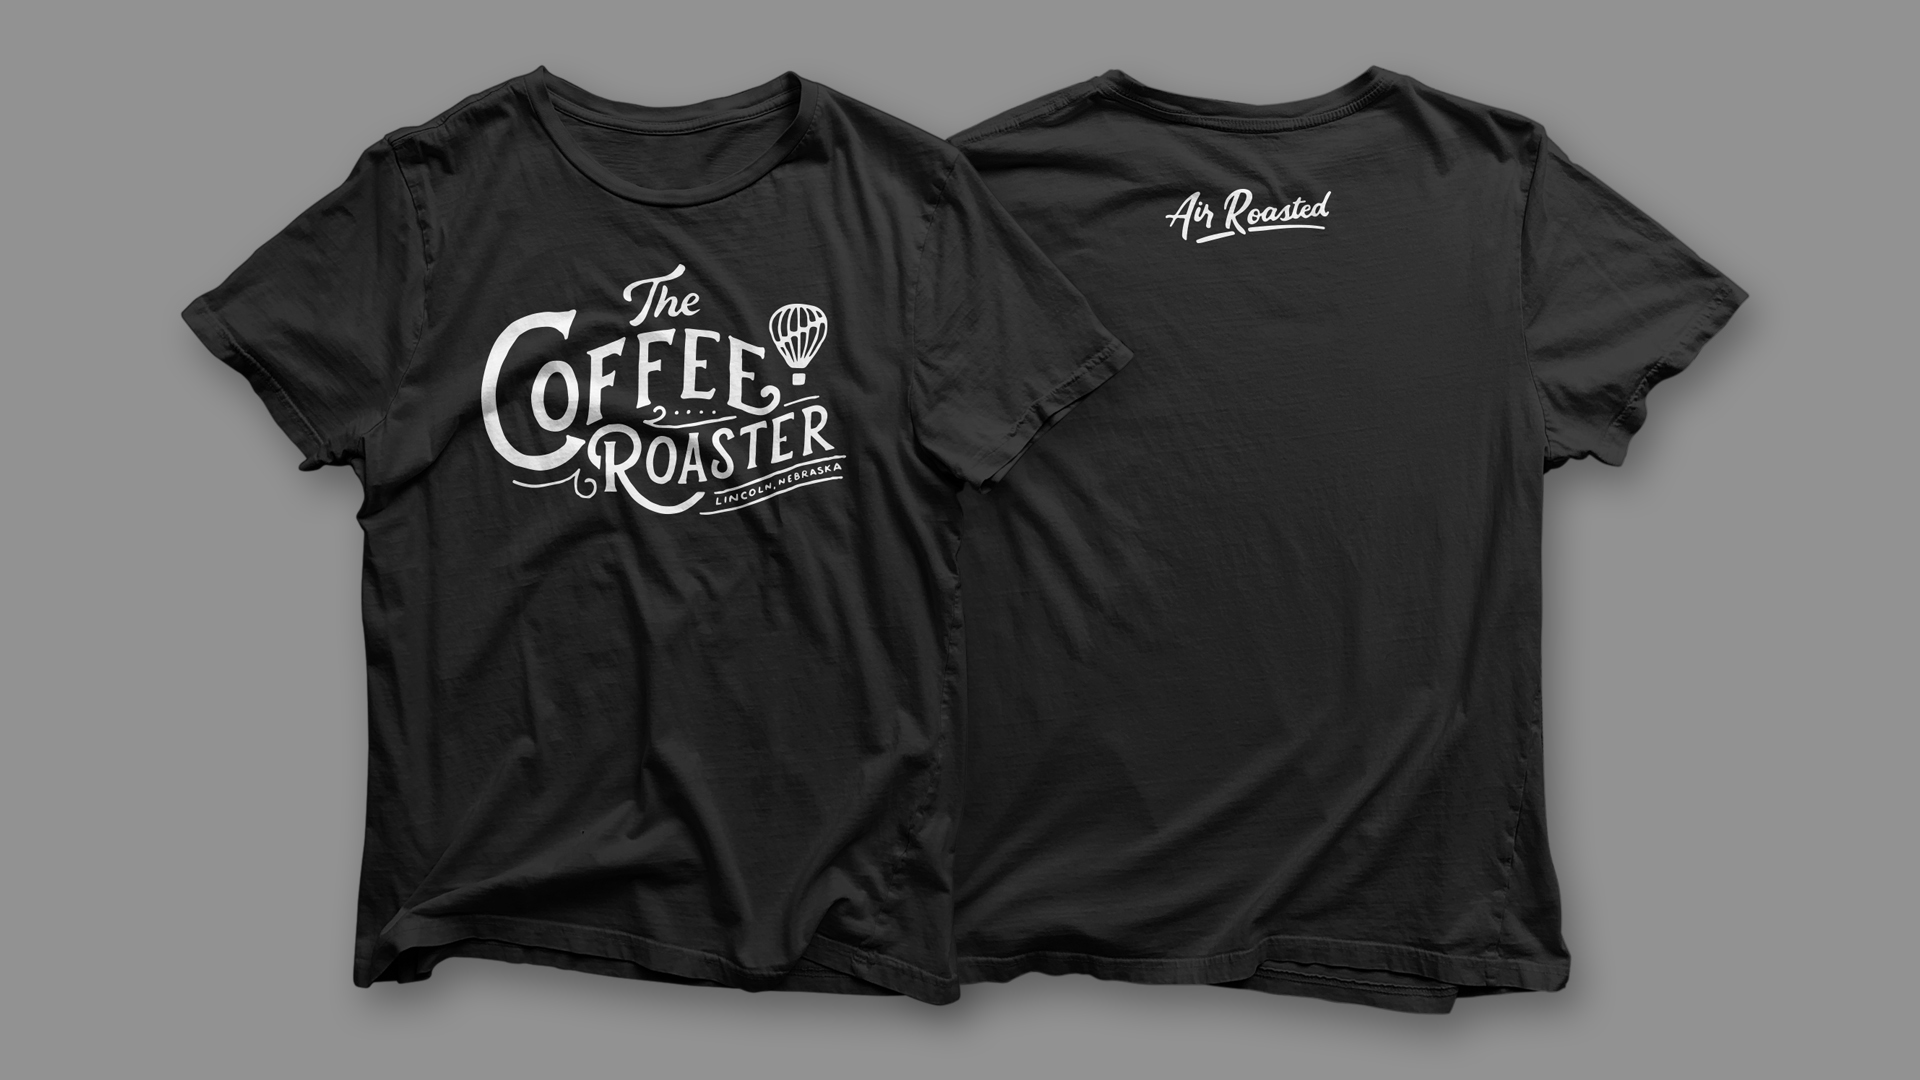 The Coffee Roaster T-shirt designs